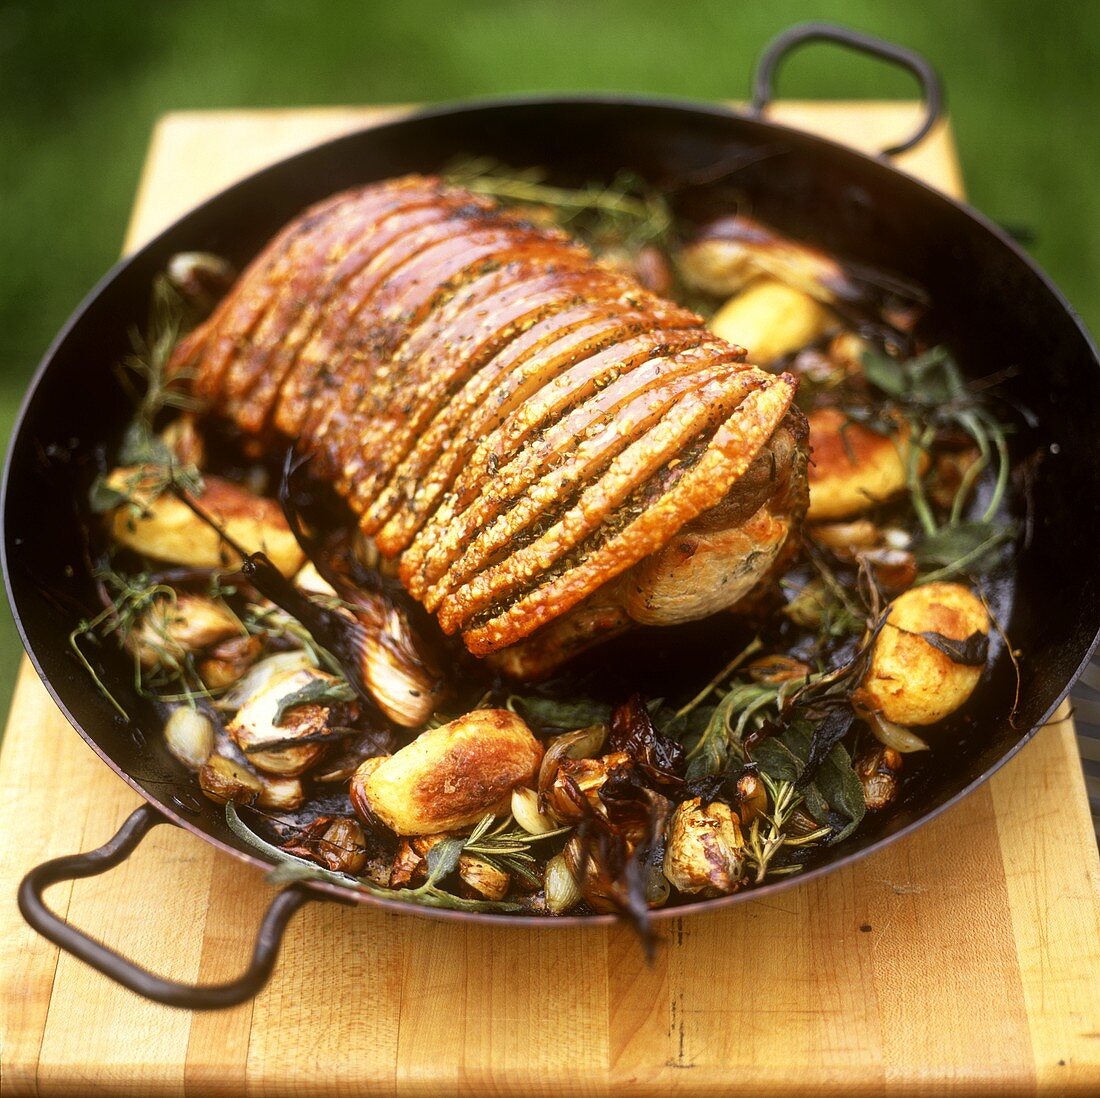 Roast pork with herbs and potatoes